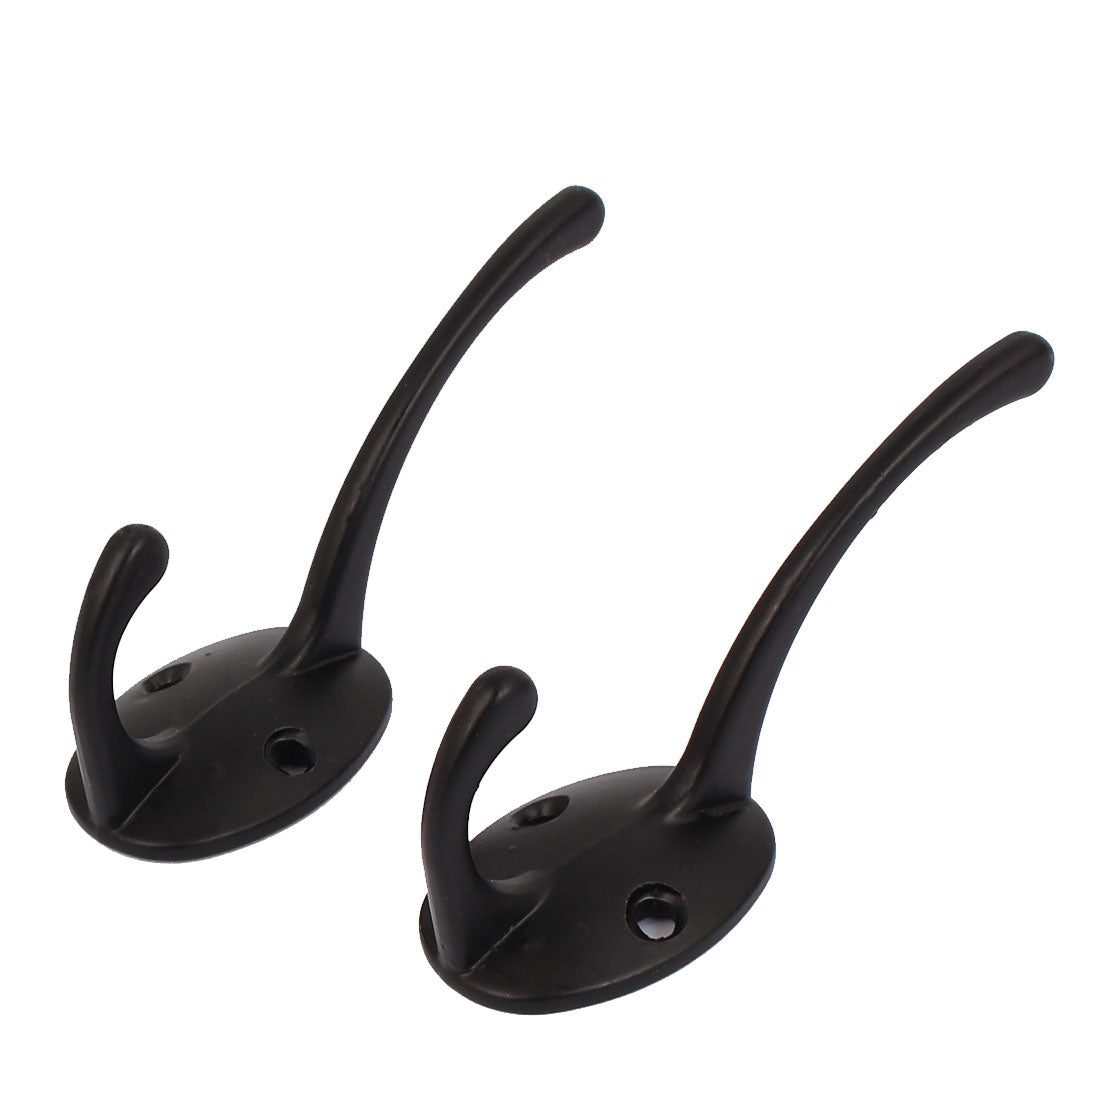 uxcell Uxcell Bedroom Clothes Coat Hanging Wall Mounted Metal Double Hanger Hook Black 2pcs